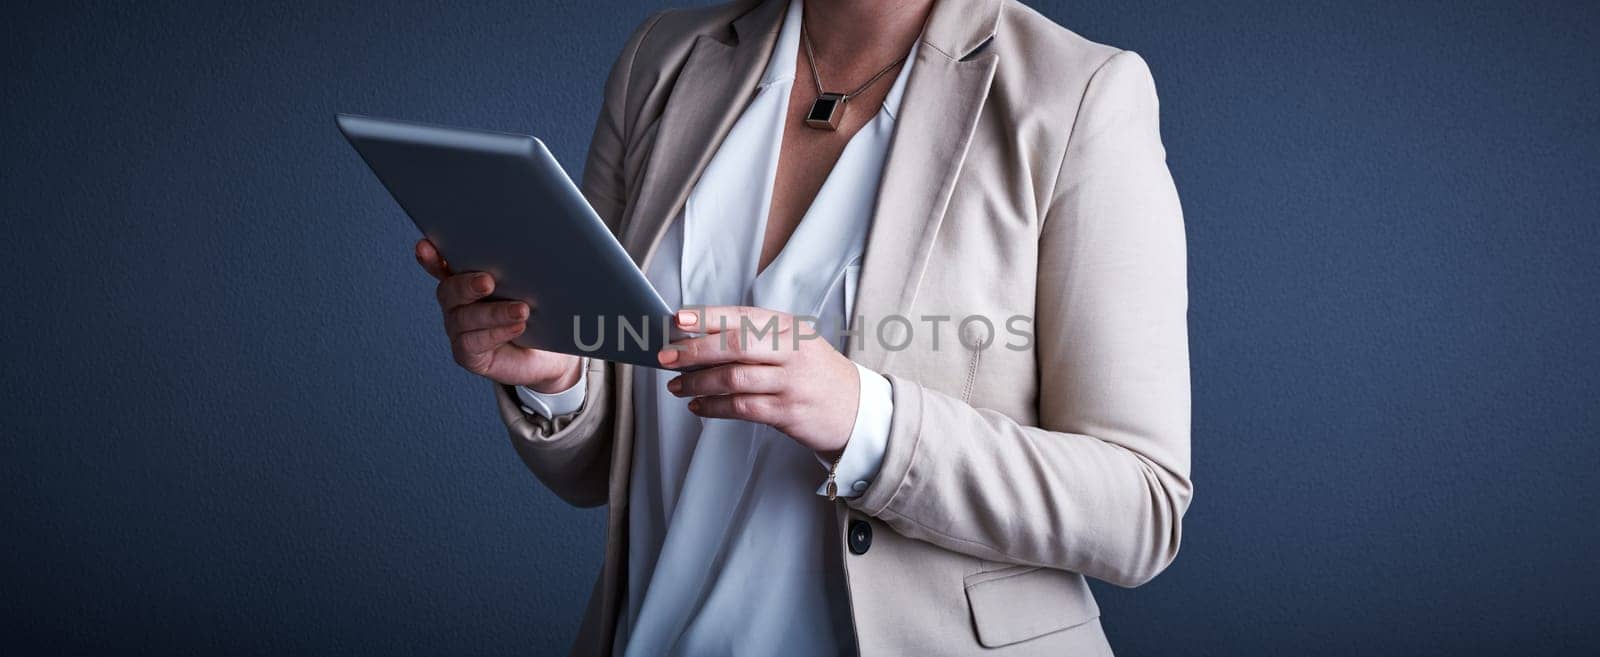 Taking advantage of technology. Studio shot of an unrecognizable corporate businesswoman using a tablet against a dark background